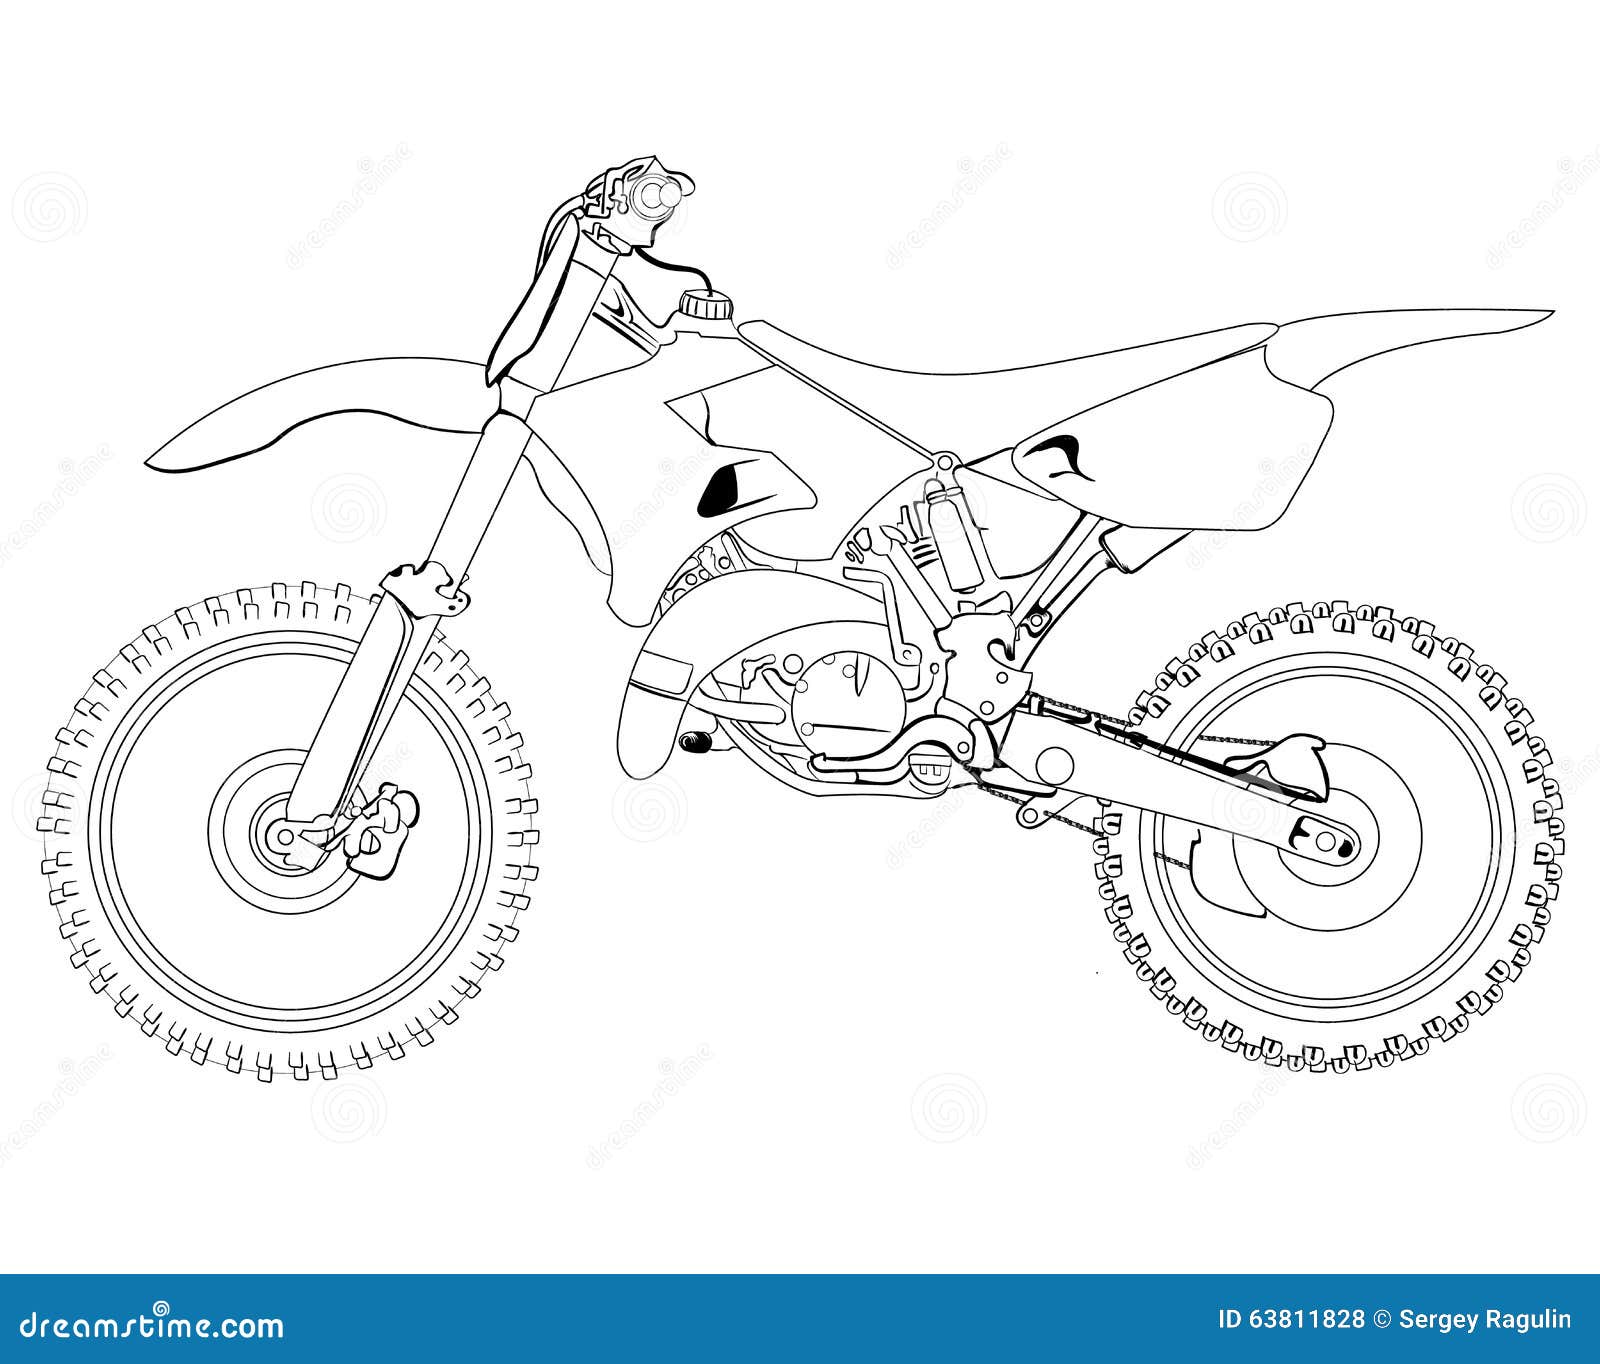 Motorcycle Drawing  How To Draw A Motorcycle Step By Step